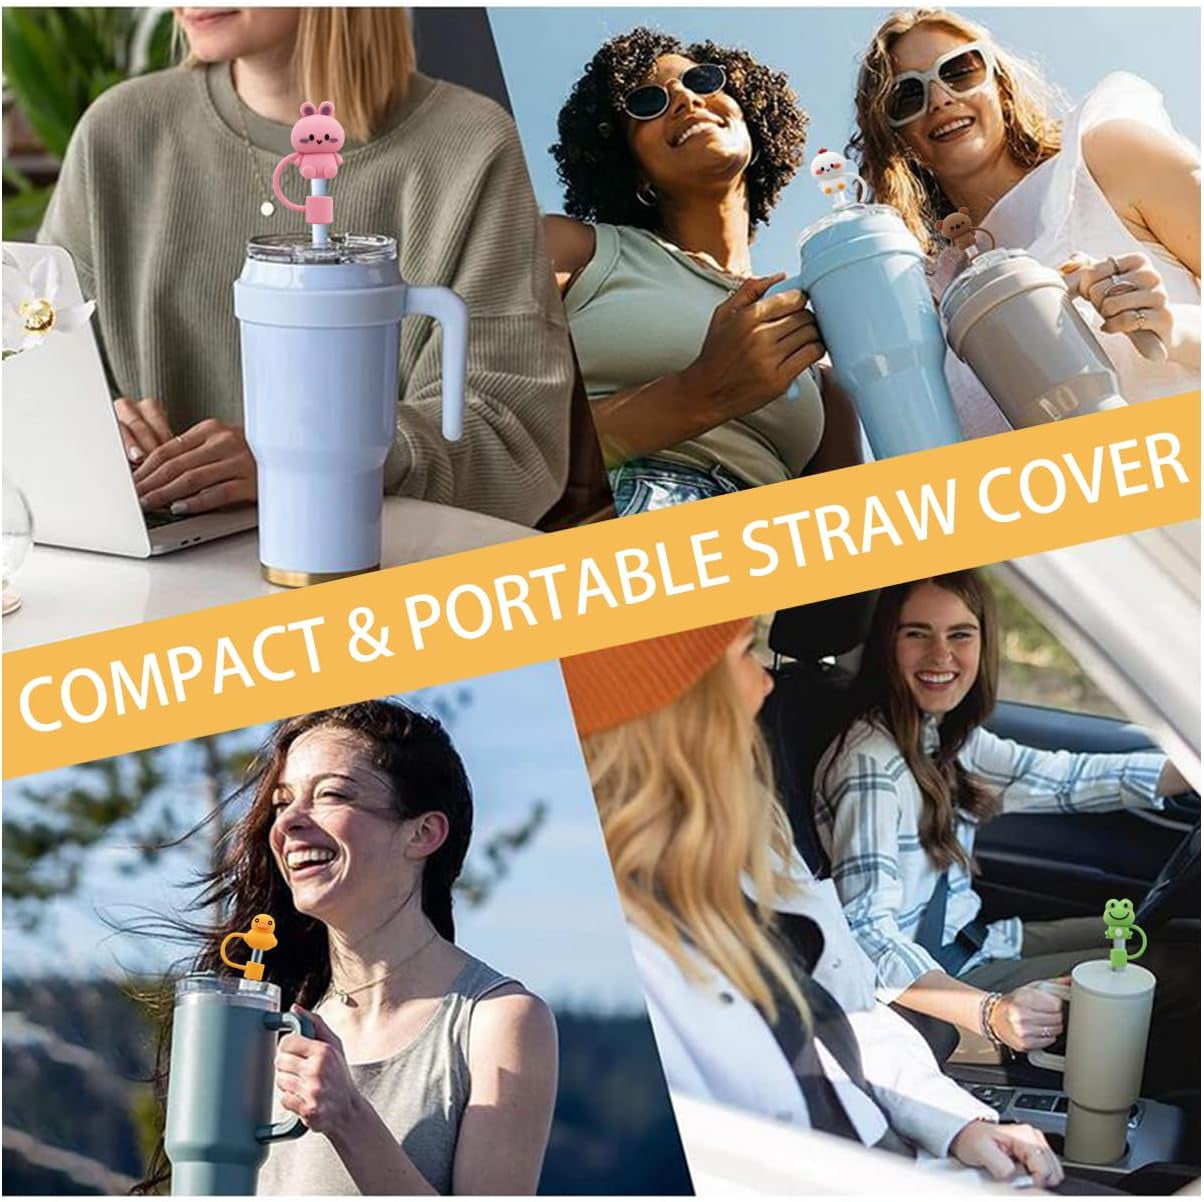 Healeved 2pcs Strawberry Straw Cover straw toppers for tumblers strawberry  straw topper drinking straw protector drink straws caps cocktail garnish